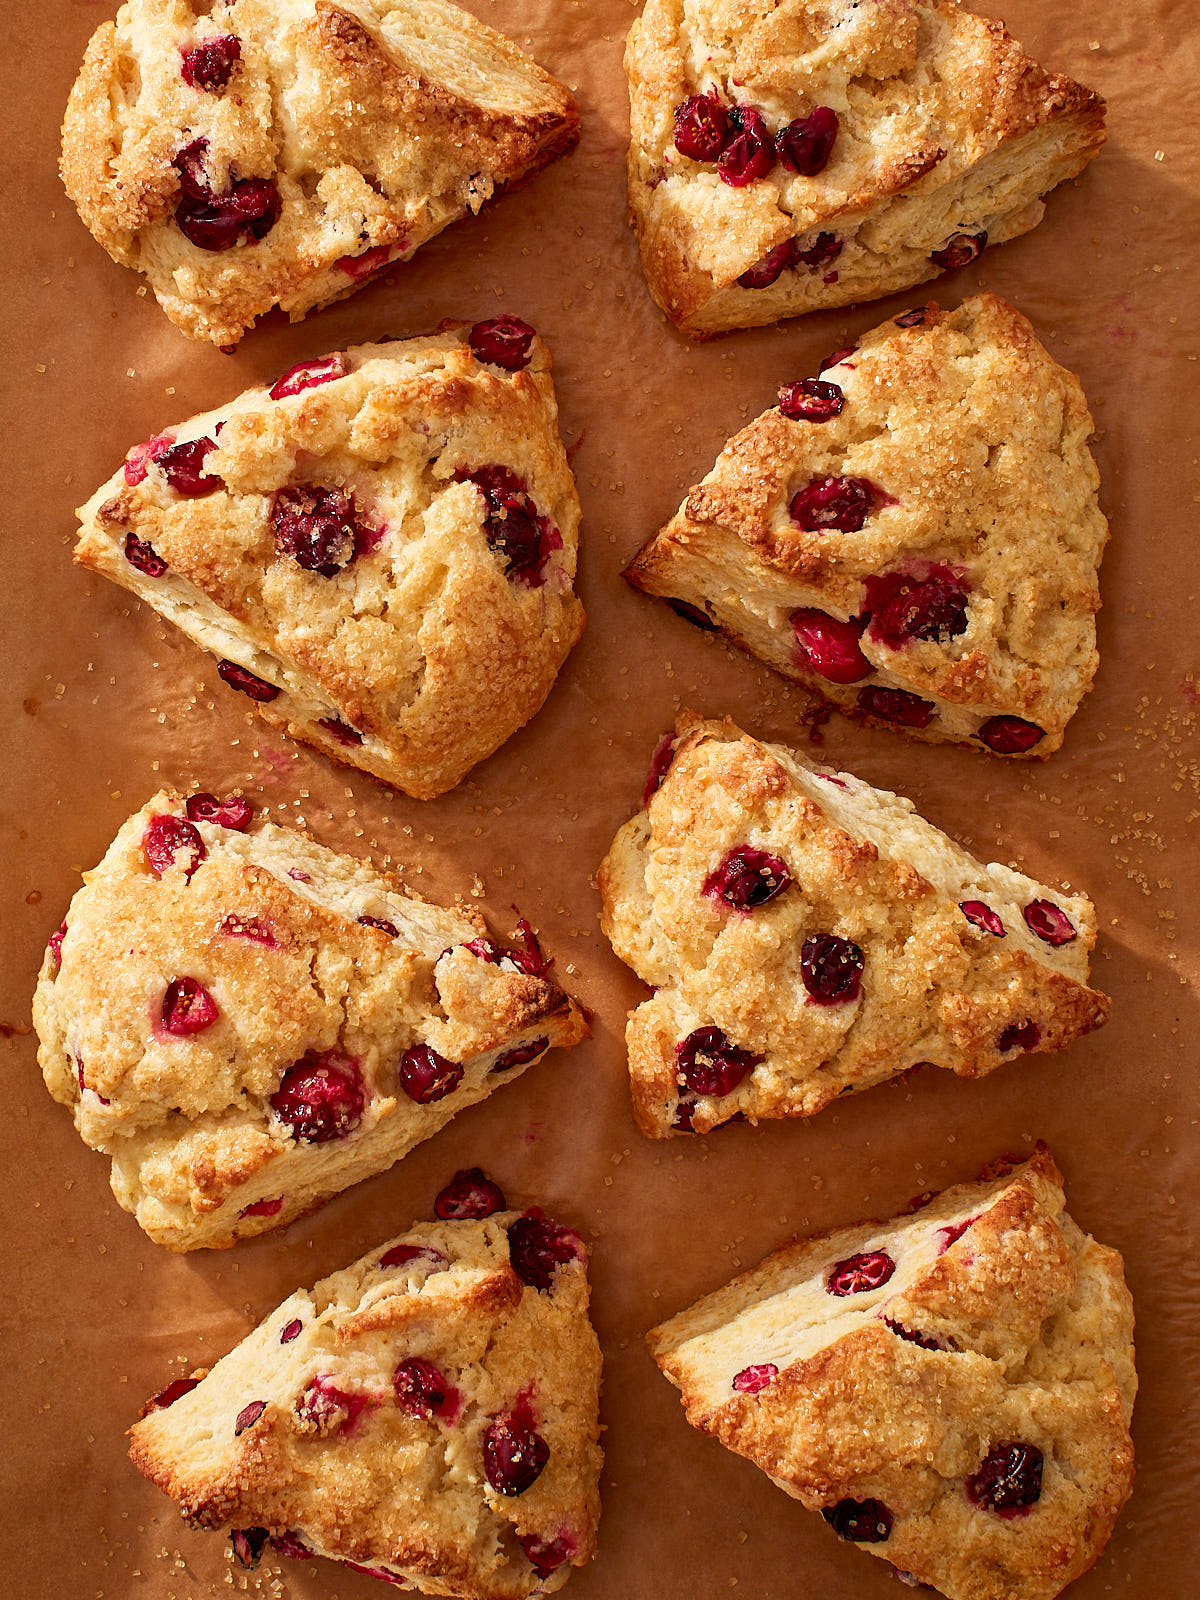 Cranberry scones, fresh from the oven, on a baking sheet.